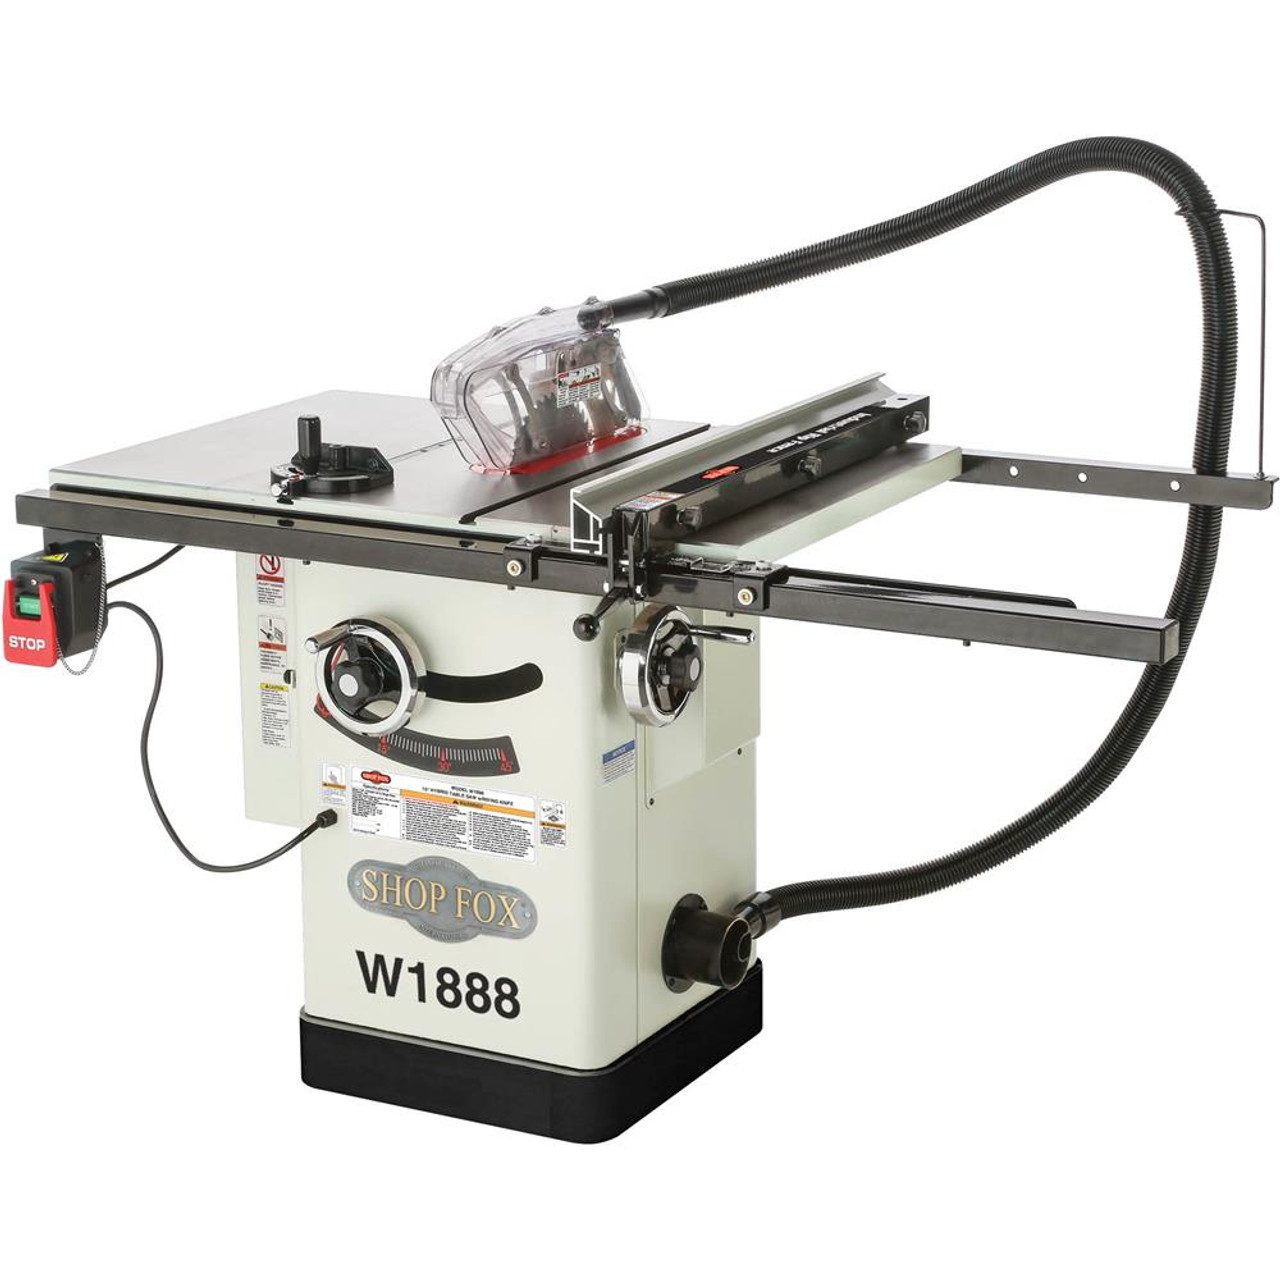 Shop Fox W1888—10" Hybrid Table Saw With Riving Knife - US Tool Depot